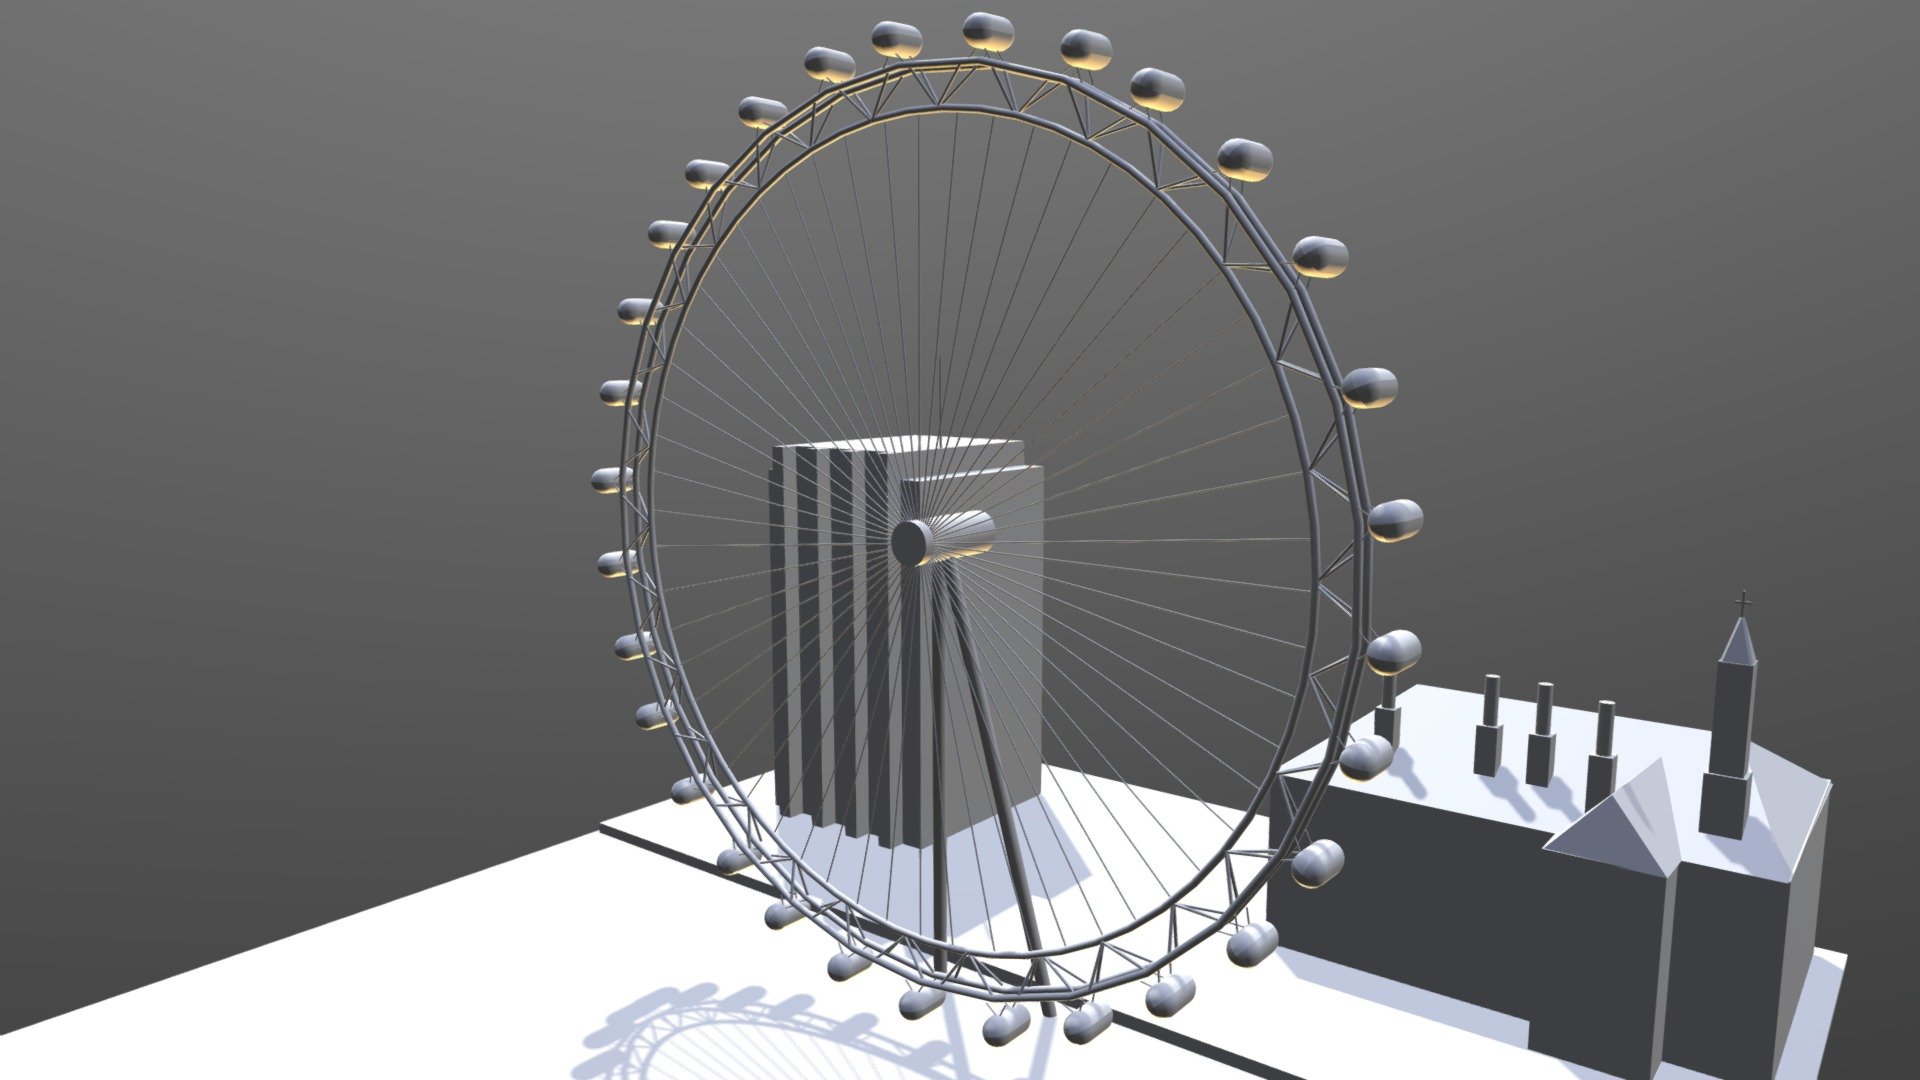 The London Eye model I made only with the wheel rotating. Fun but unnecessary project 3d model